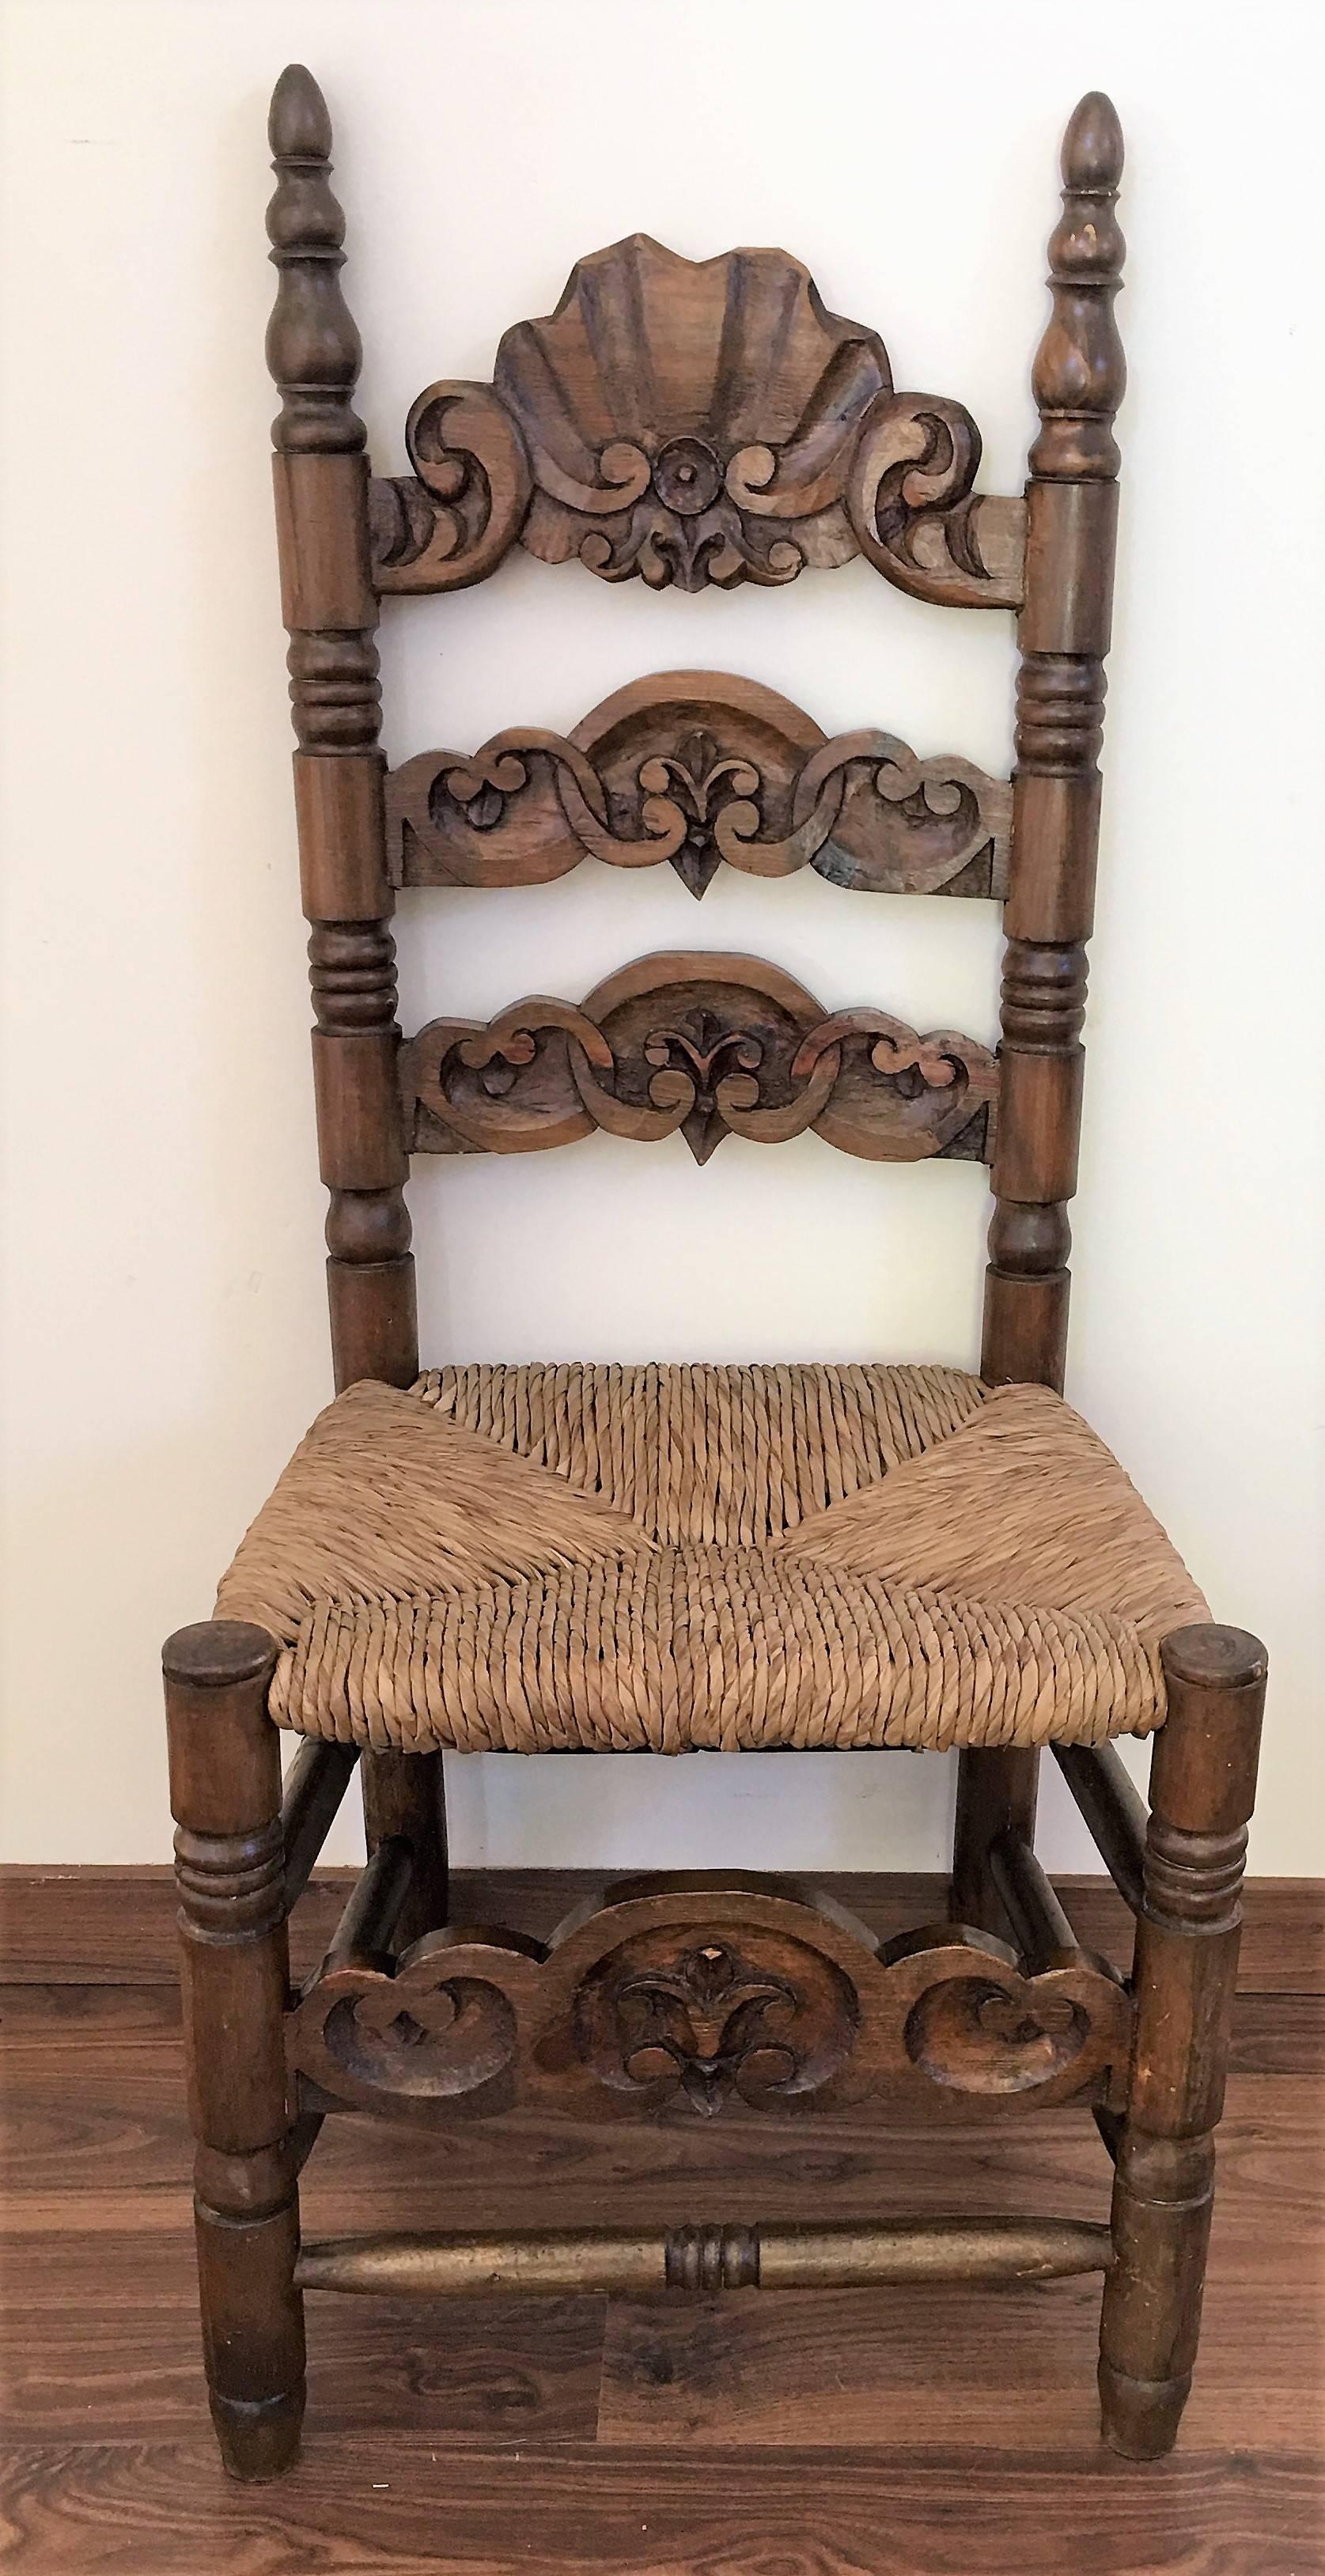 Cane Set of Six Chairs, Turned and Carved Wood, with Straw Seat of the 20th Century